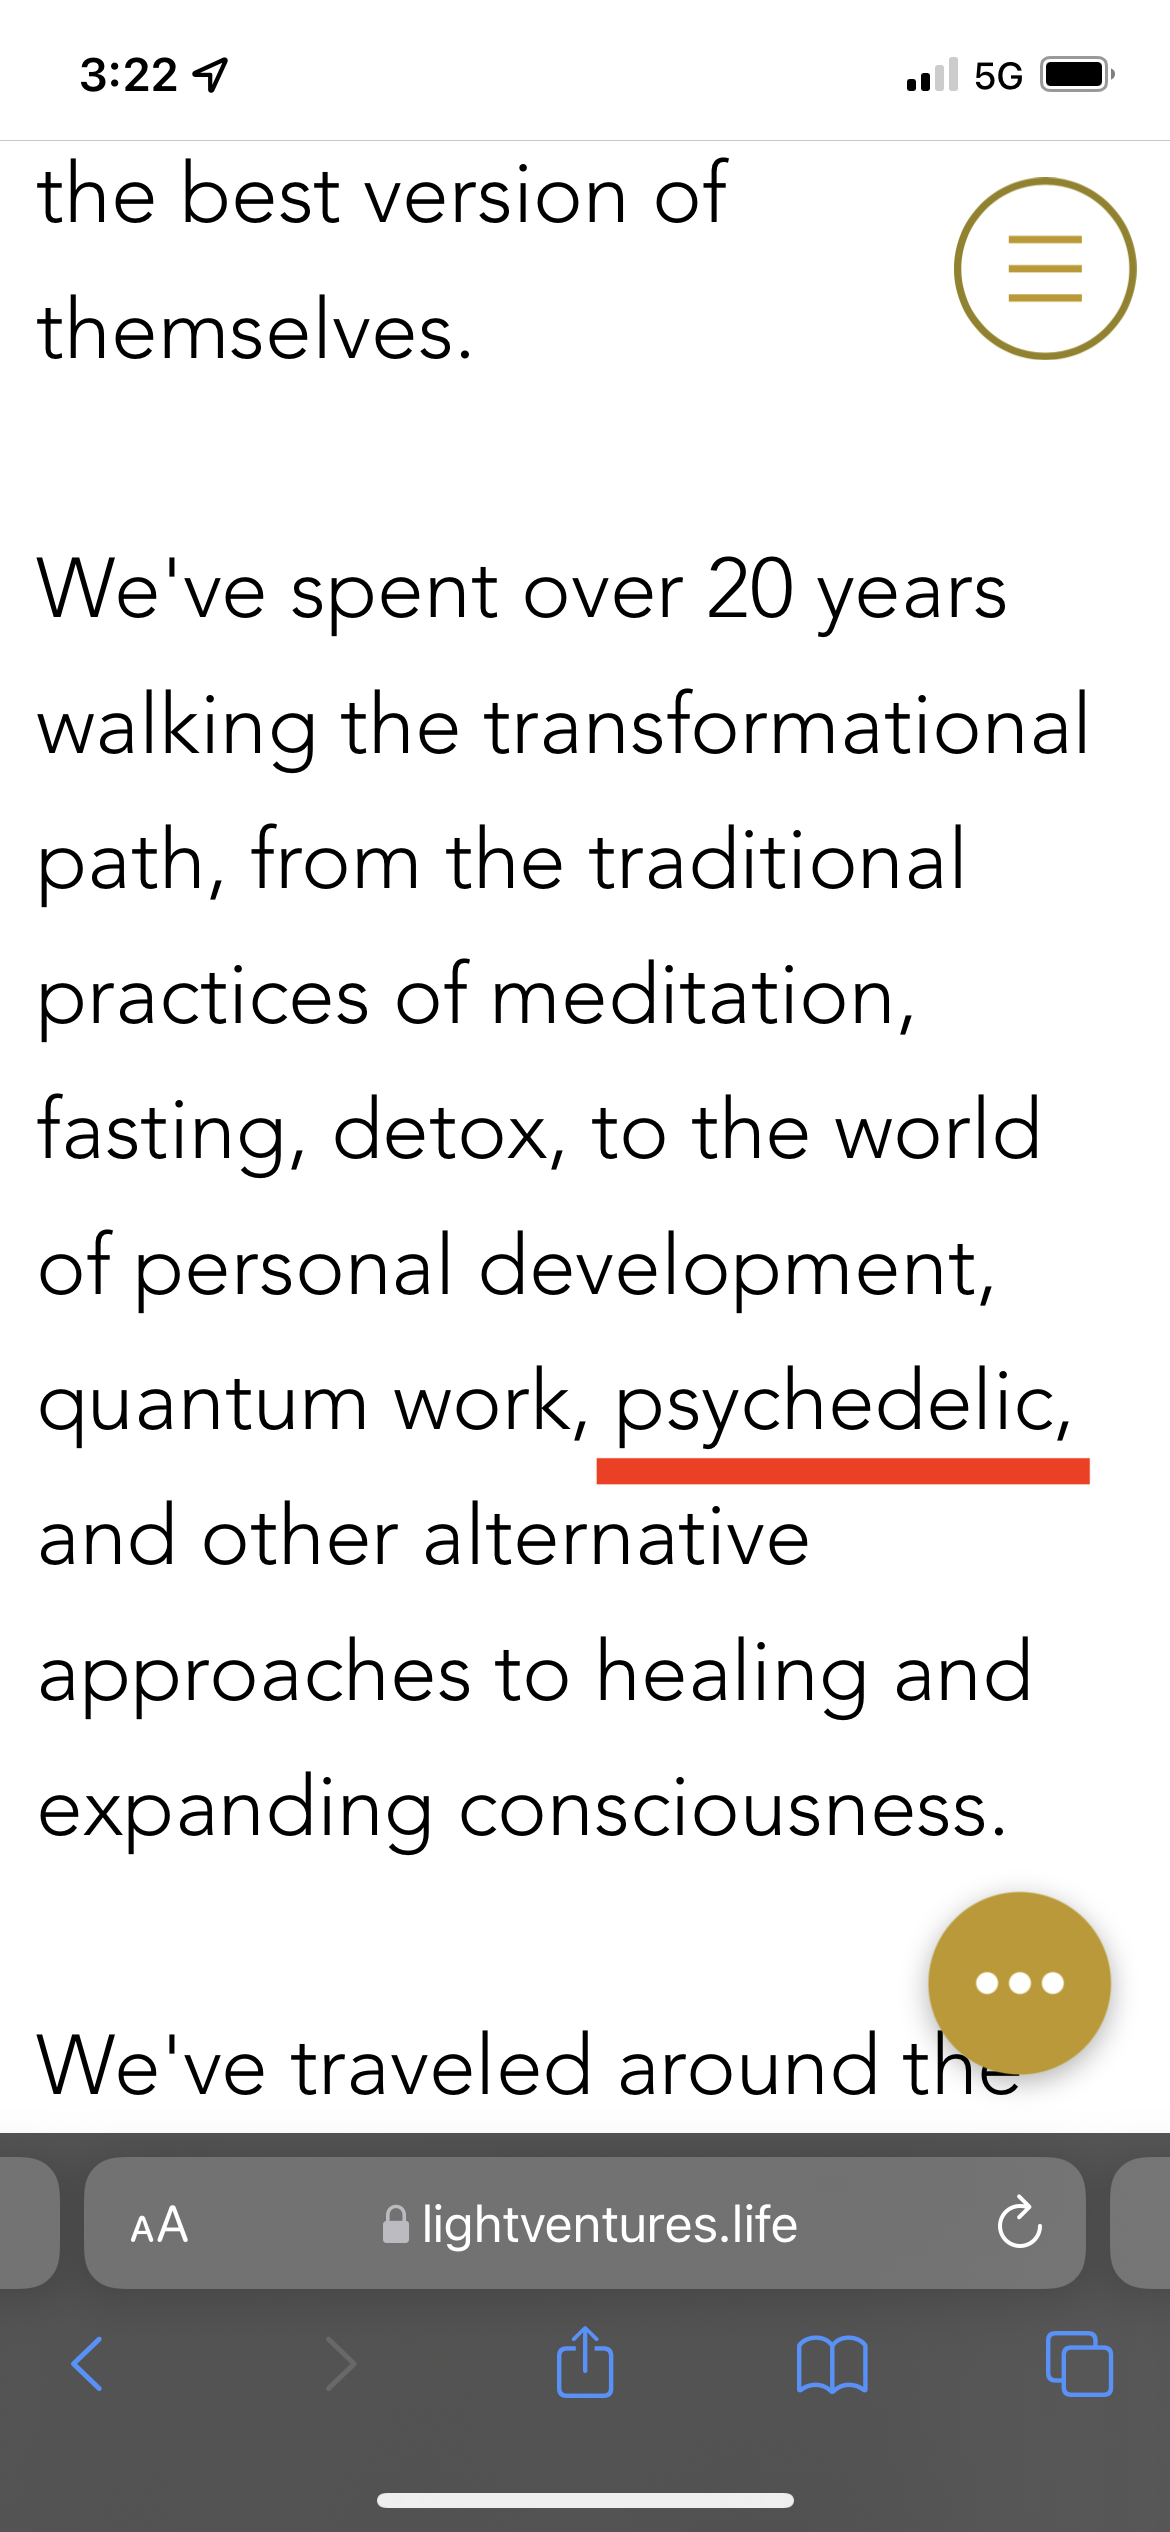 The Soul Doctors' website mentions psychedelics on their about page.